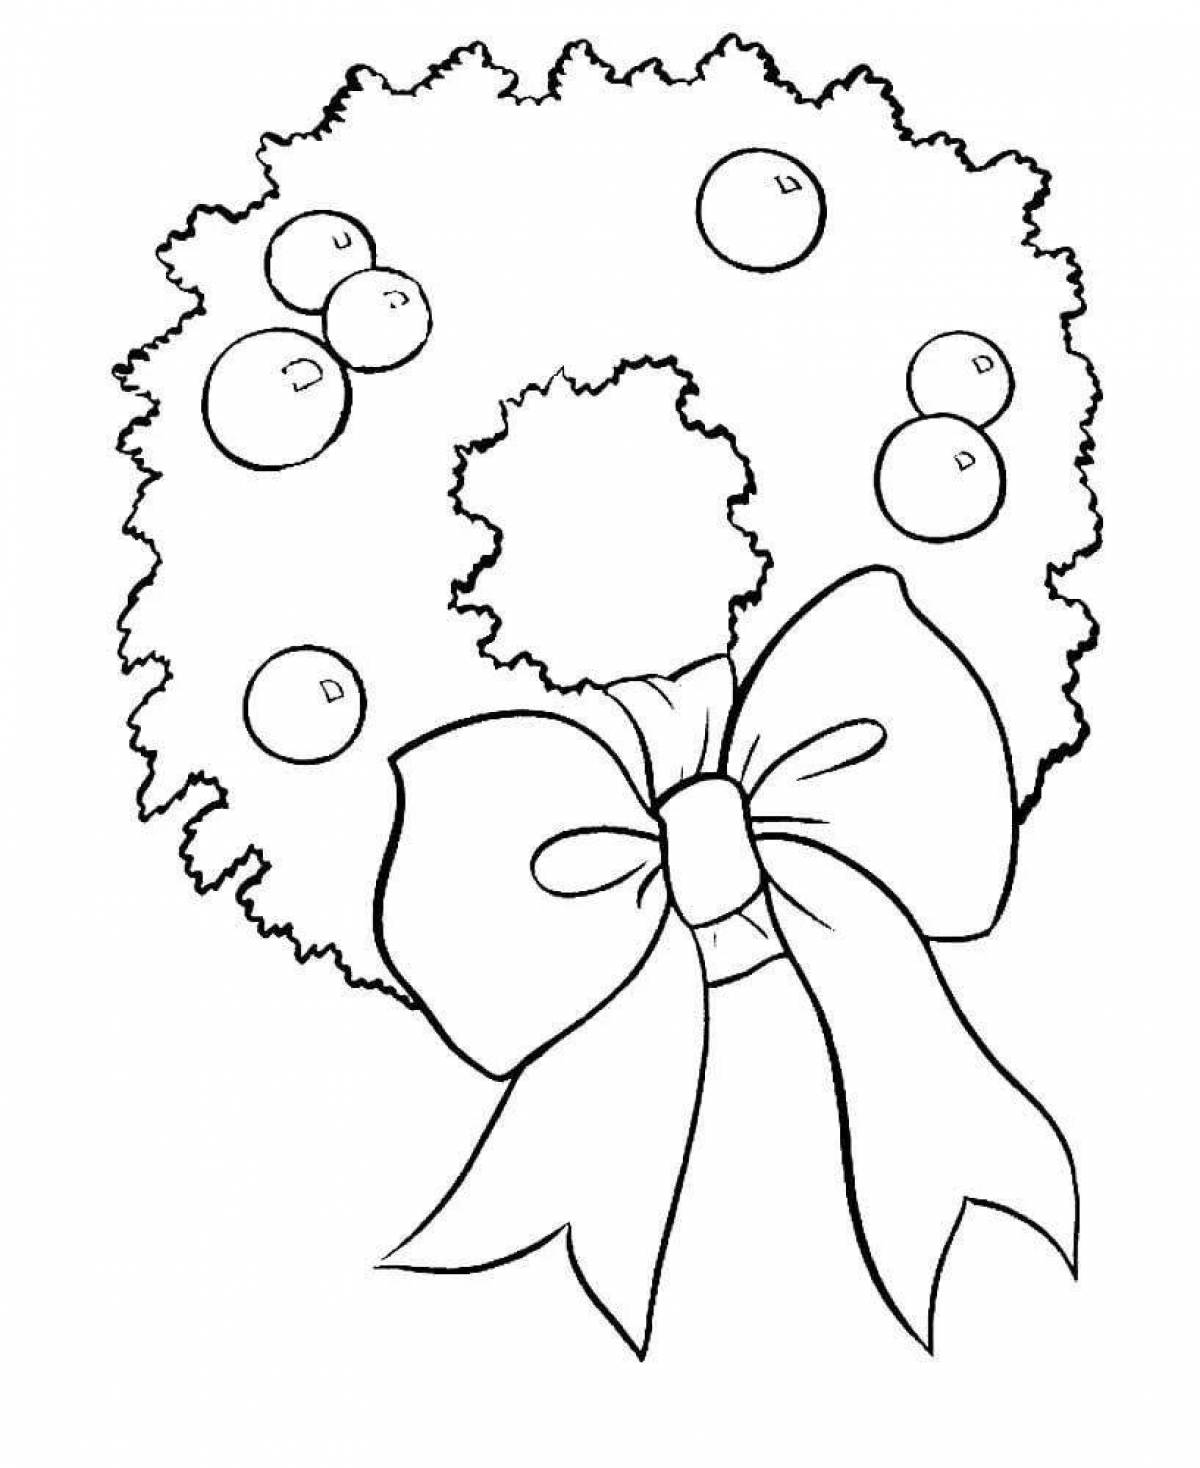 Christmas wreath holiday coloring book for kids